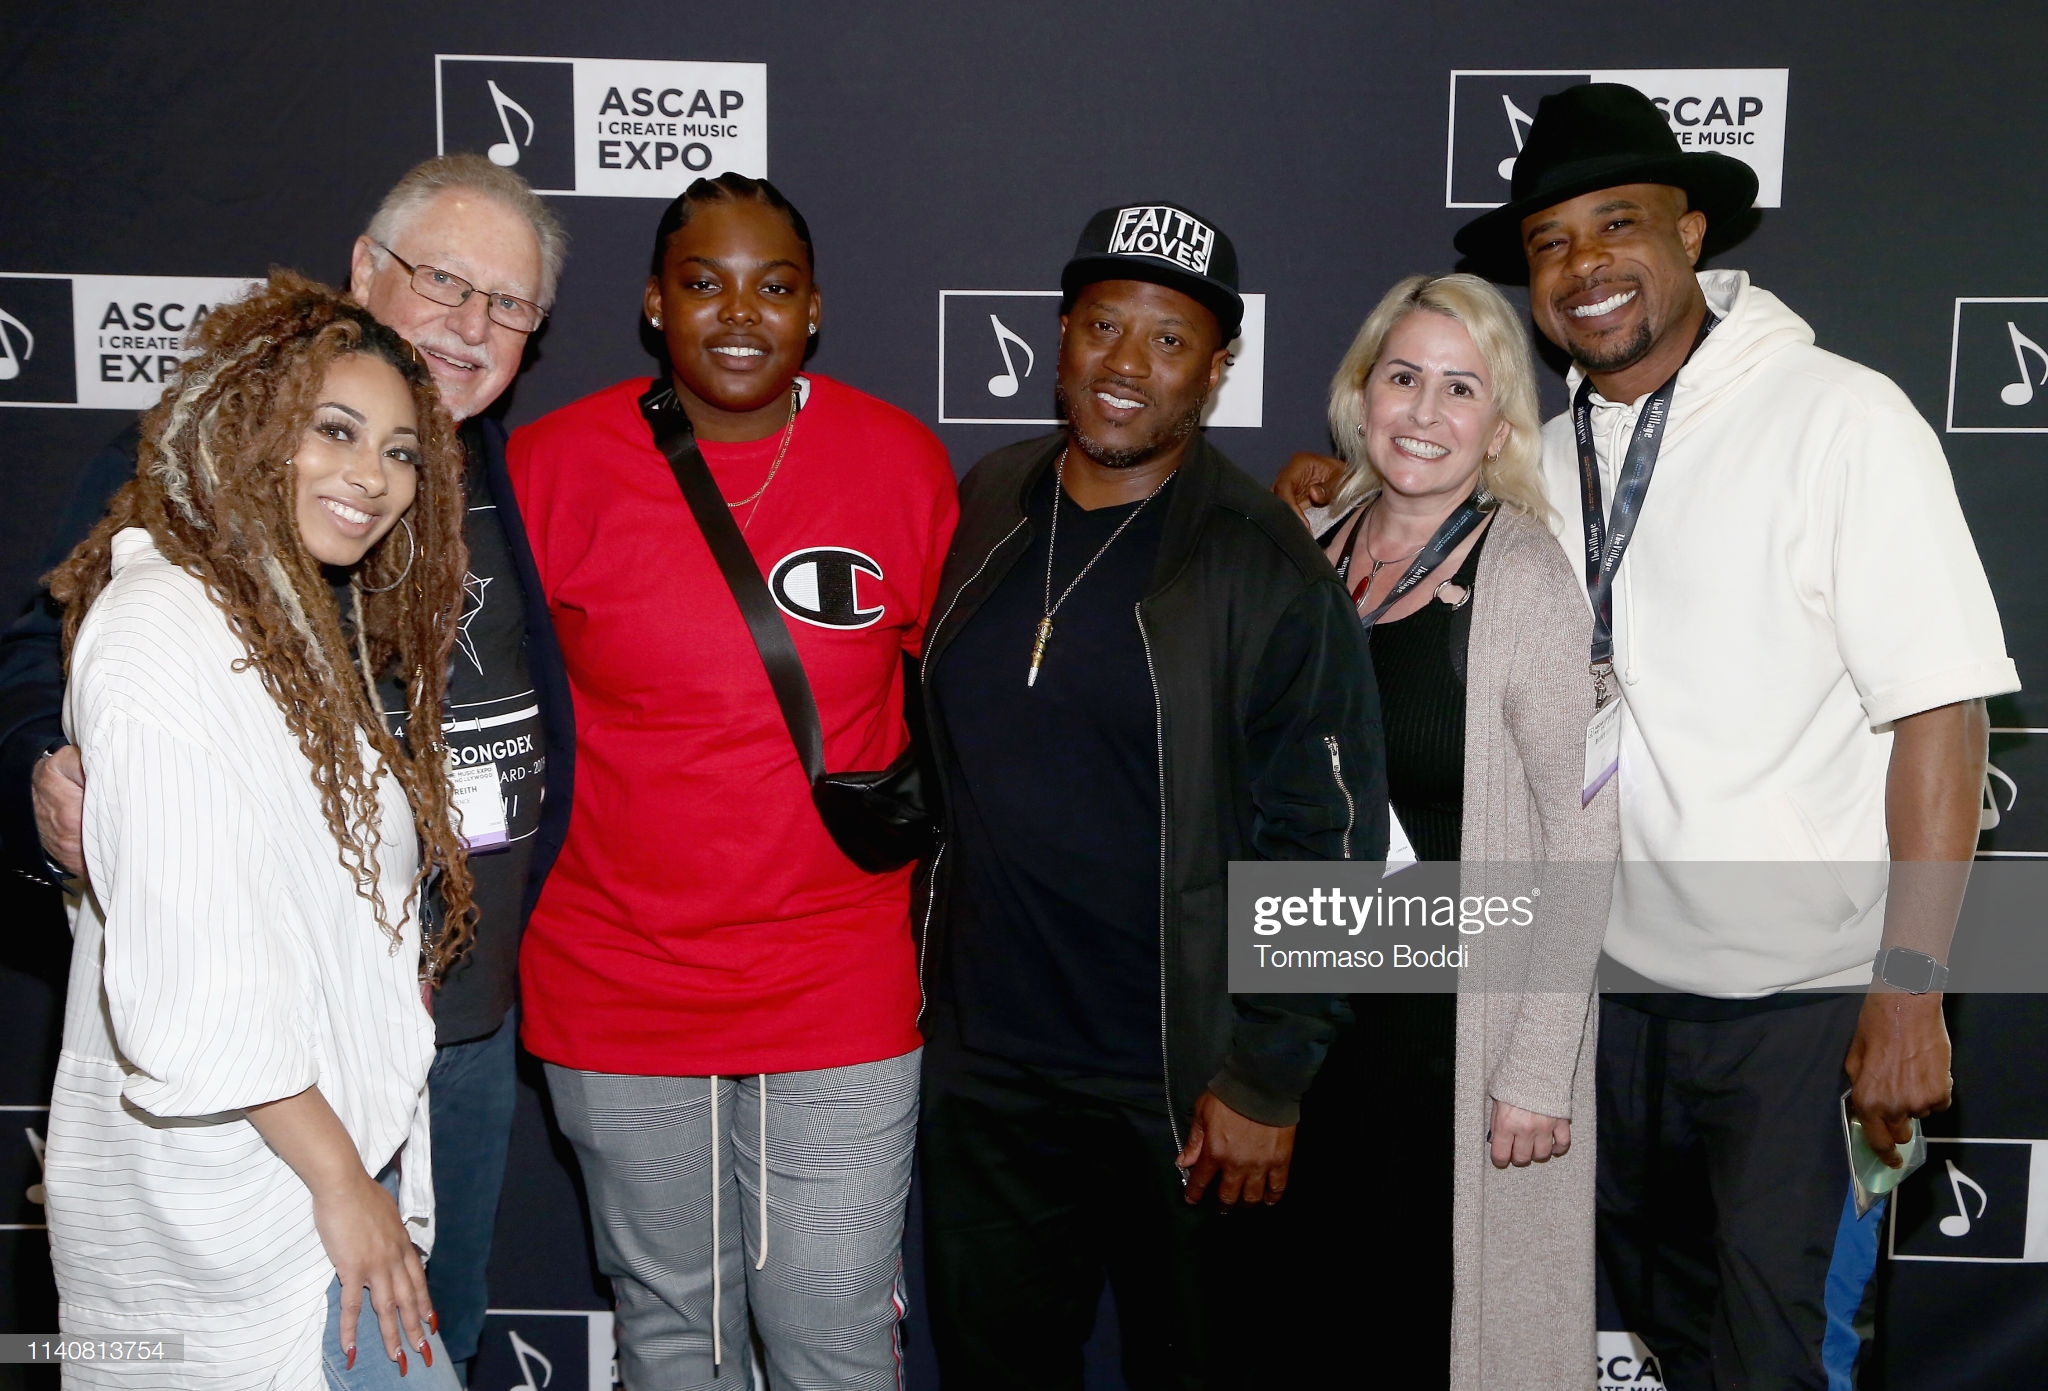  (L-R) Ashley Broom, Dennis Dreith, Morgen Campbell, Gorden Campbell, Transparence Entertainment Group CEO Shari Hoffman and Producer Bruce Waynne 